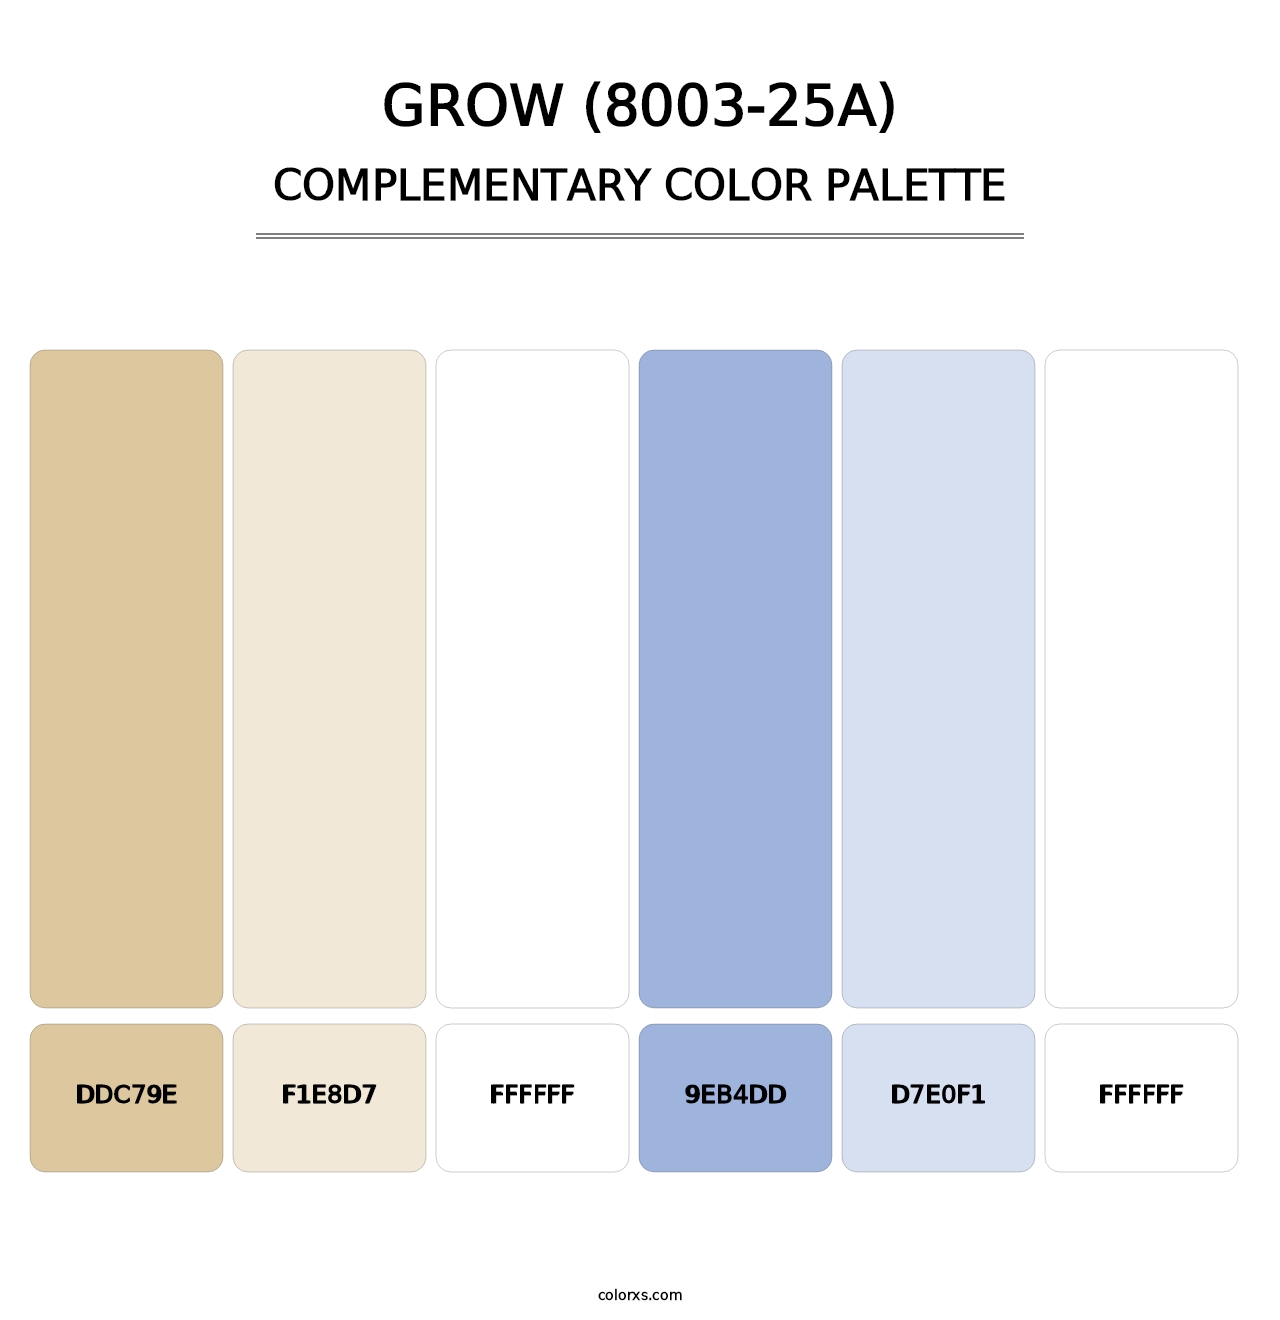 Grow (8003-25A) - Complementary Color Palette